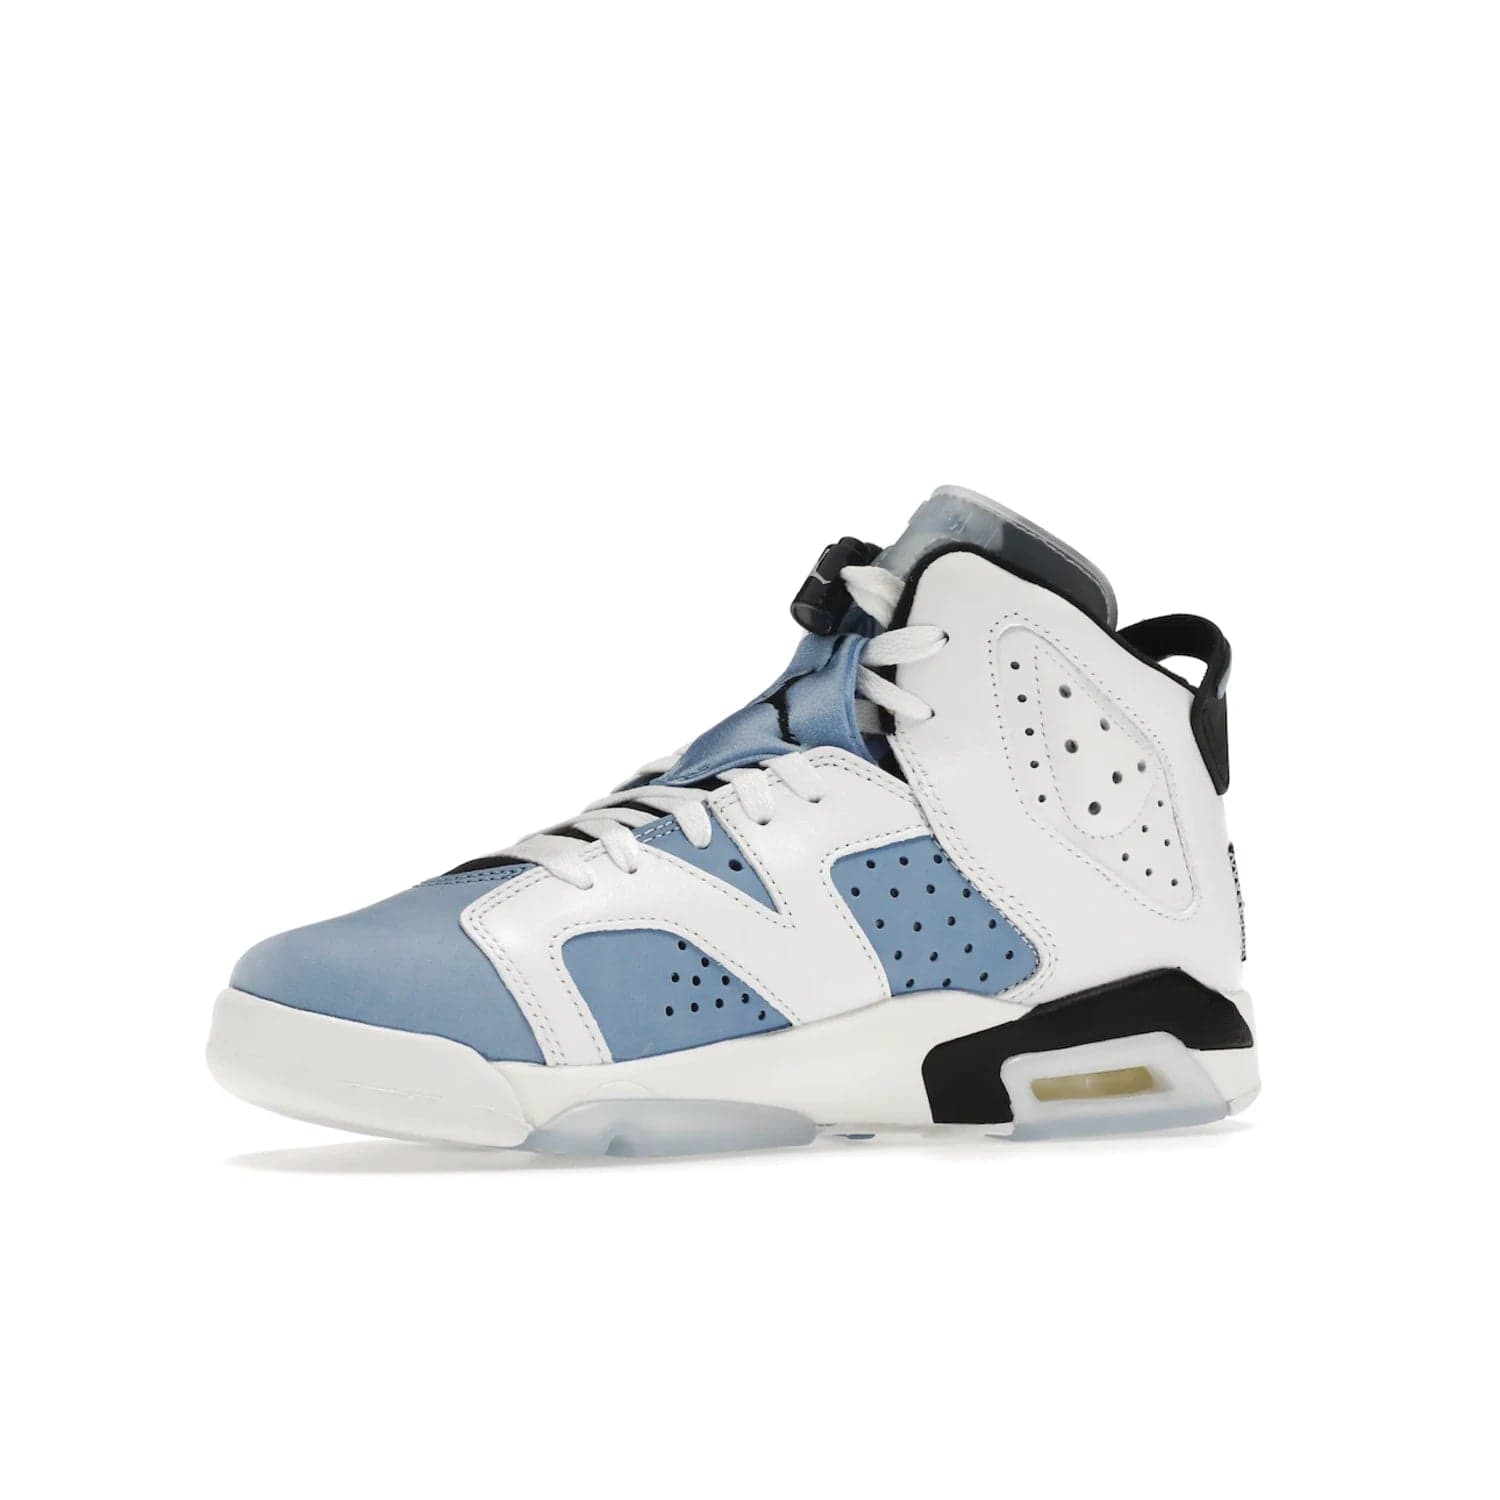 Jordan 6 Retro UNC White (GS) - Image 16 - Only at www.BallersClubKickz.com - Air Jordan 6 Retro UNC White GS: Michael Jordan alma mater, UNC Tar Heels, featuring colorway, nubuck, leather, Jumpman branding and a visible Air unit. Translucent blue/white outsole, perfect for completing sneaker rotation.